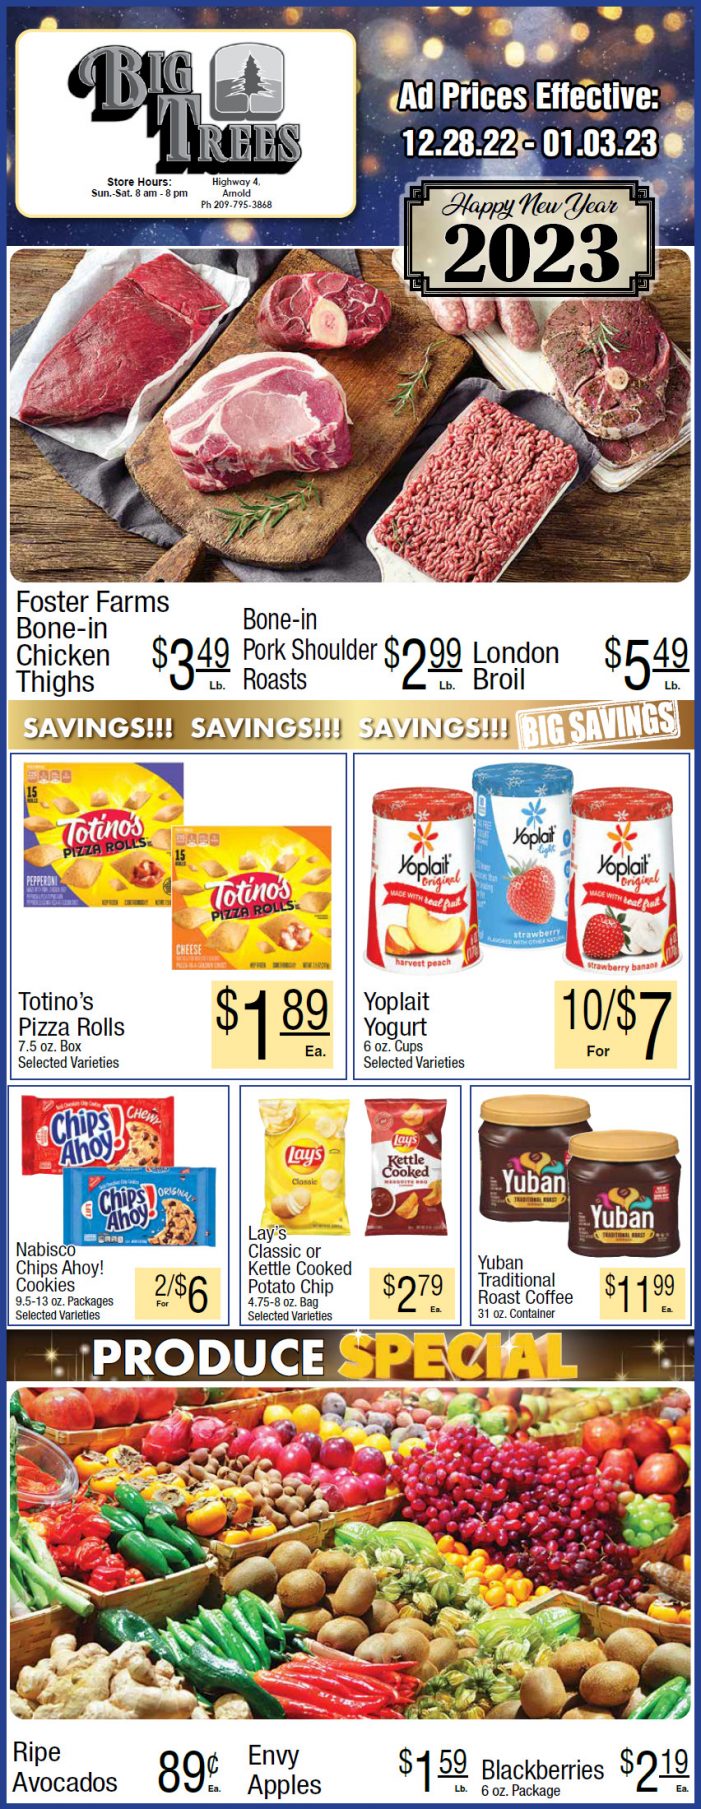 Big Trees Market Weekly Ad & Grocery & New Years Specials!  December 28 – January 3rd! Shop Local & Save!!